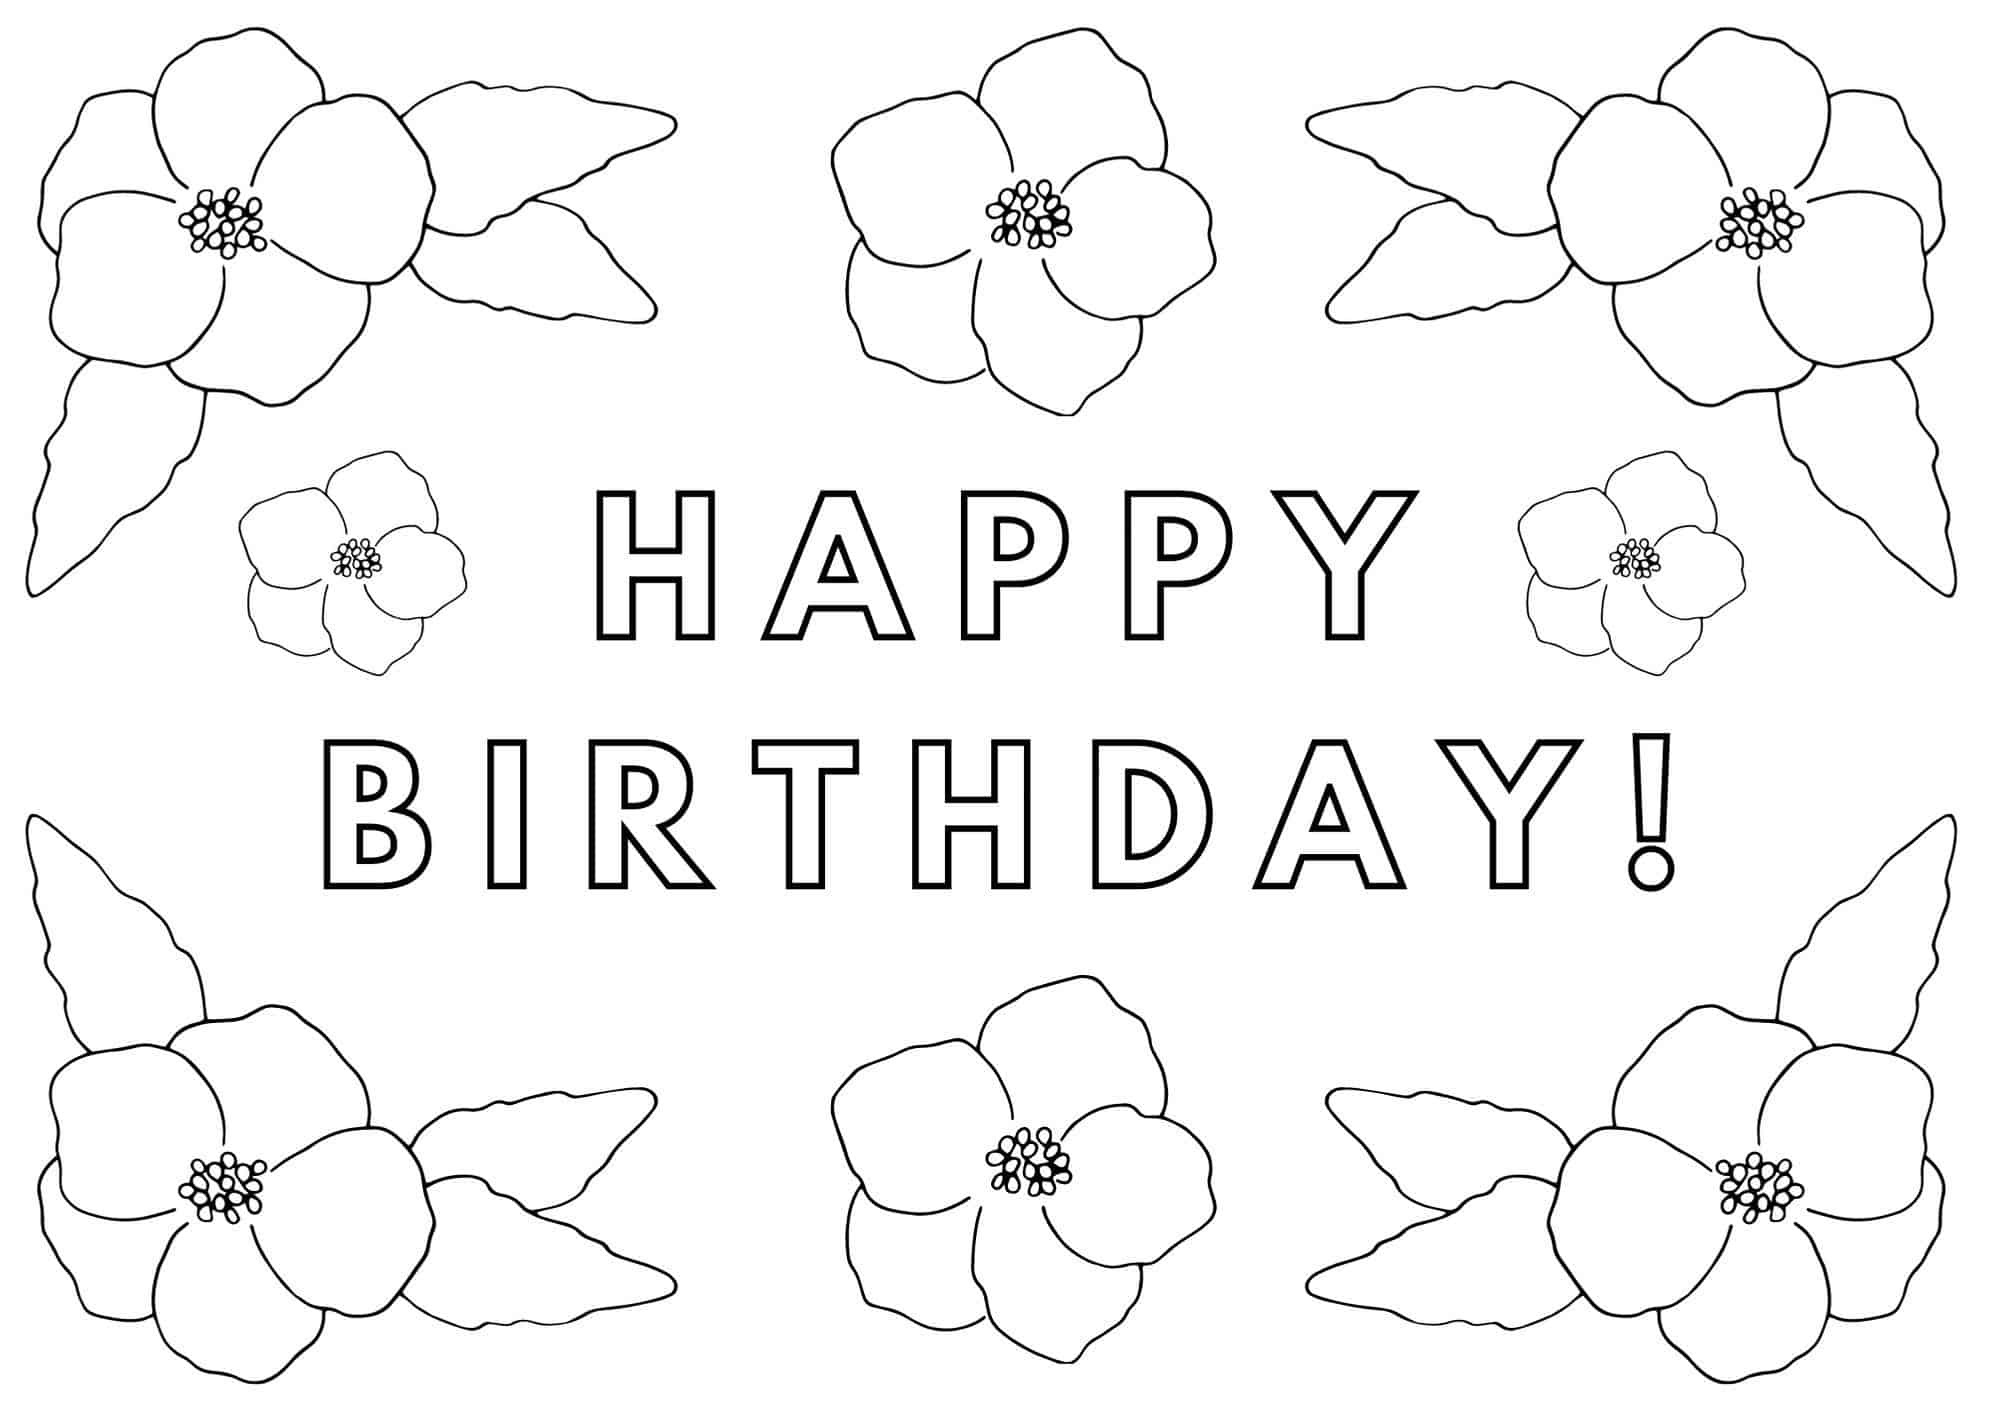 Happy Birthday Coloring Cards - Add a Little Adventure